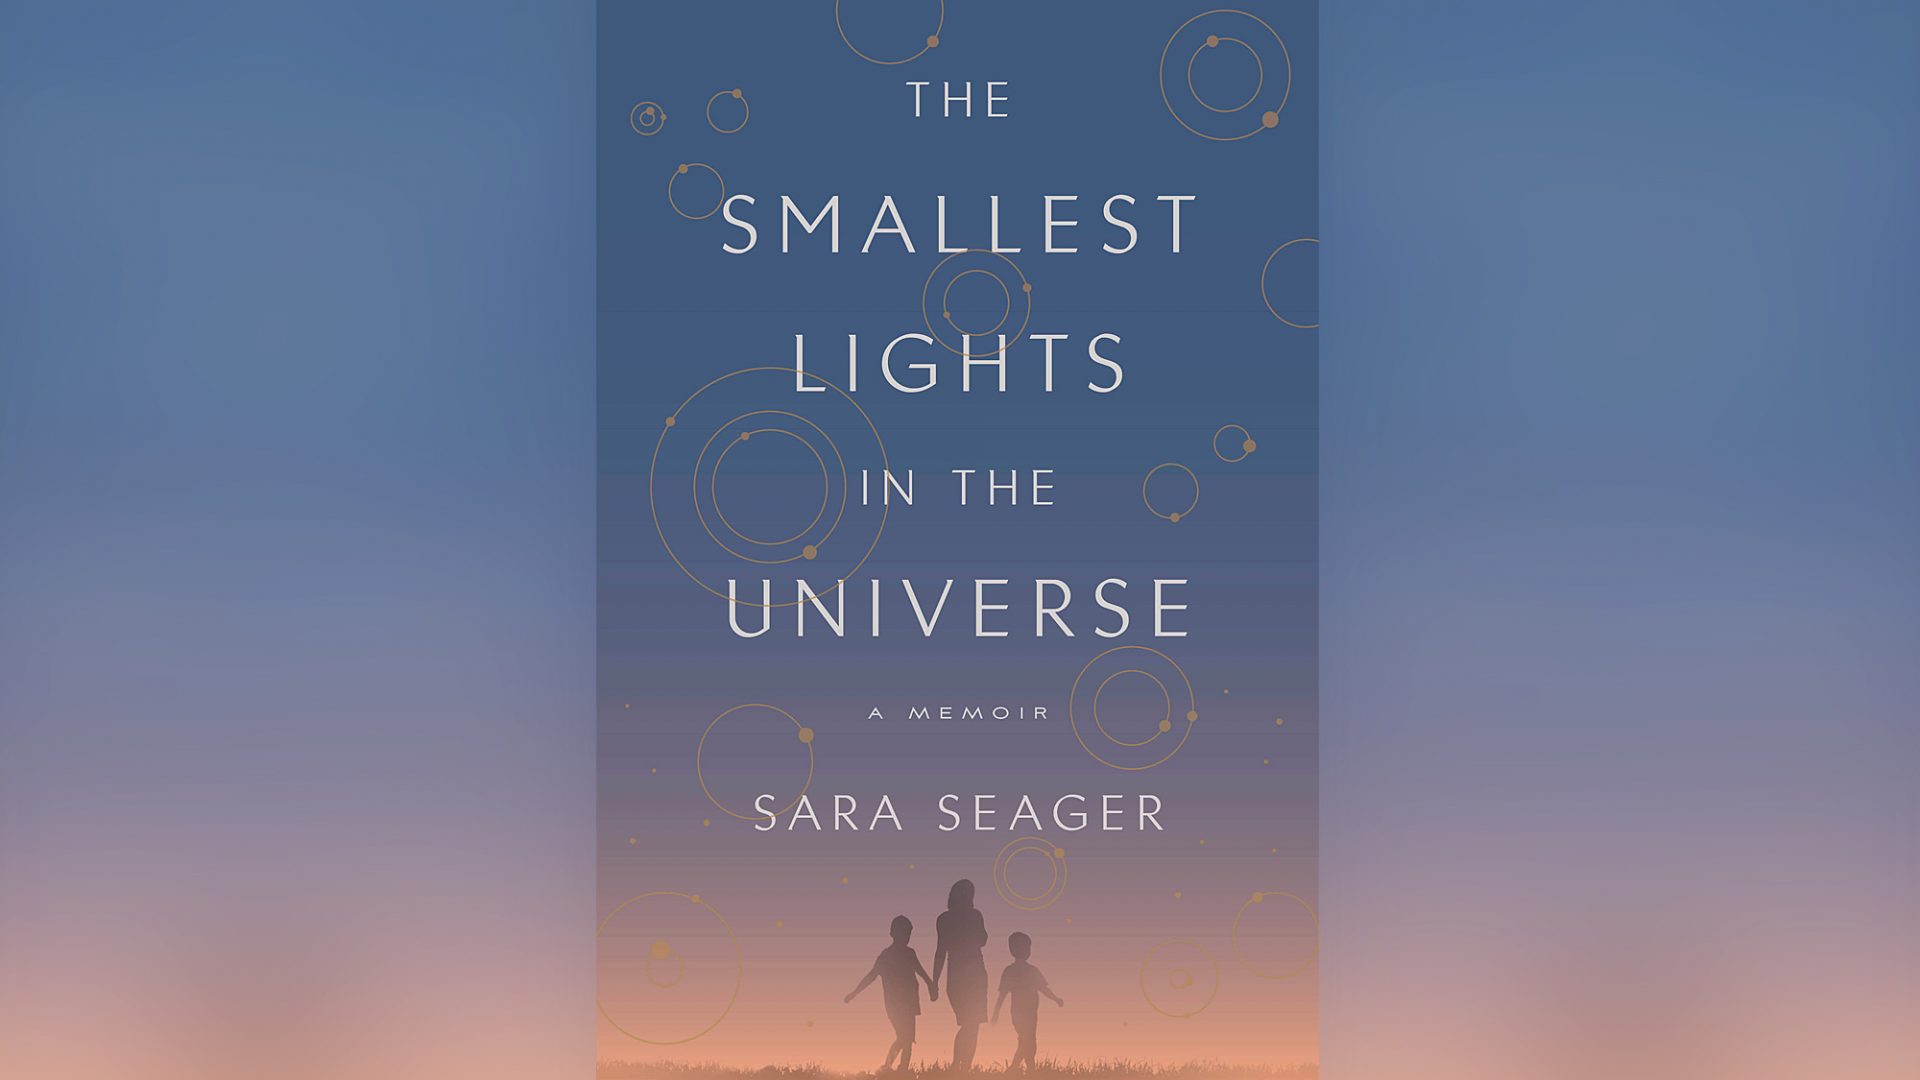 ‘The Smallest Lights within the Universe’ explores the potentialities of life on Earth and a long way beyond it